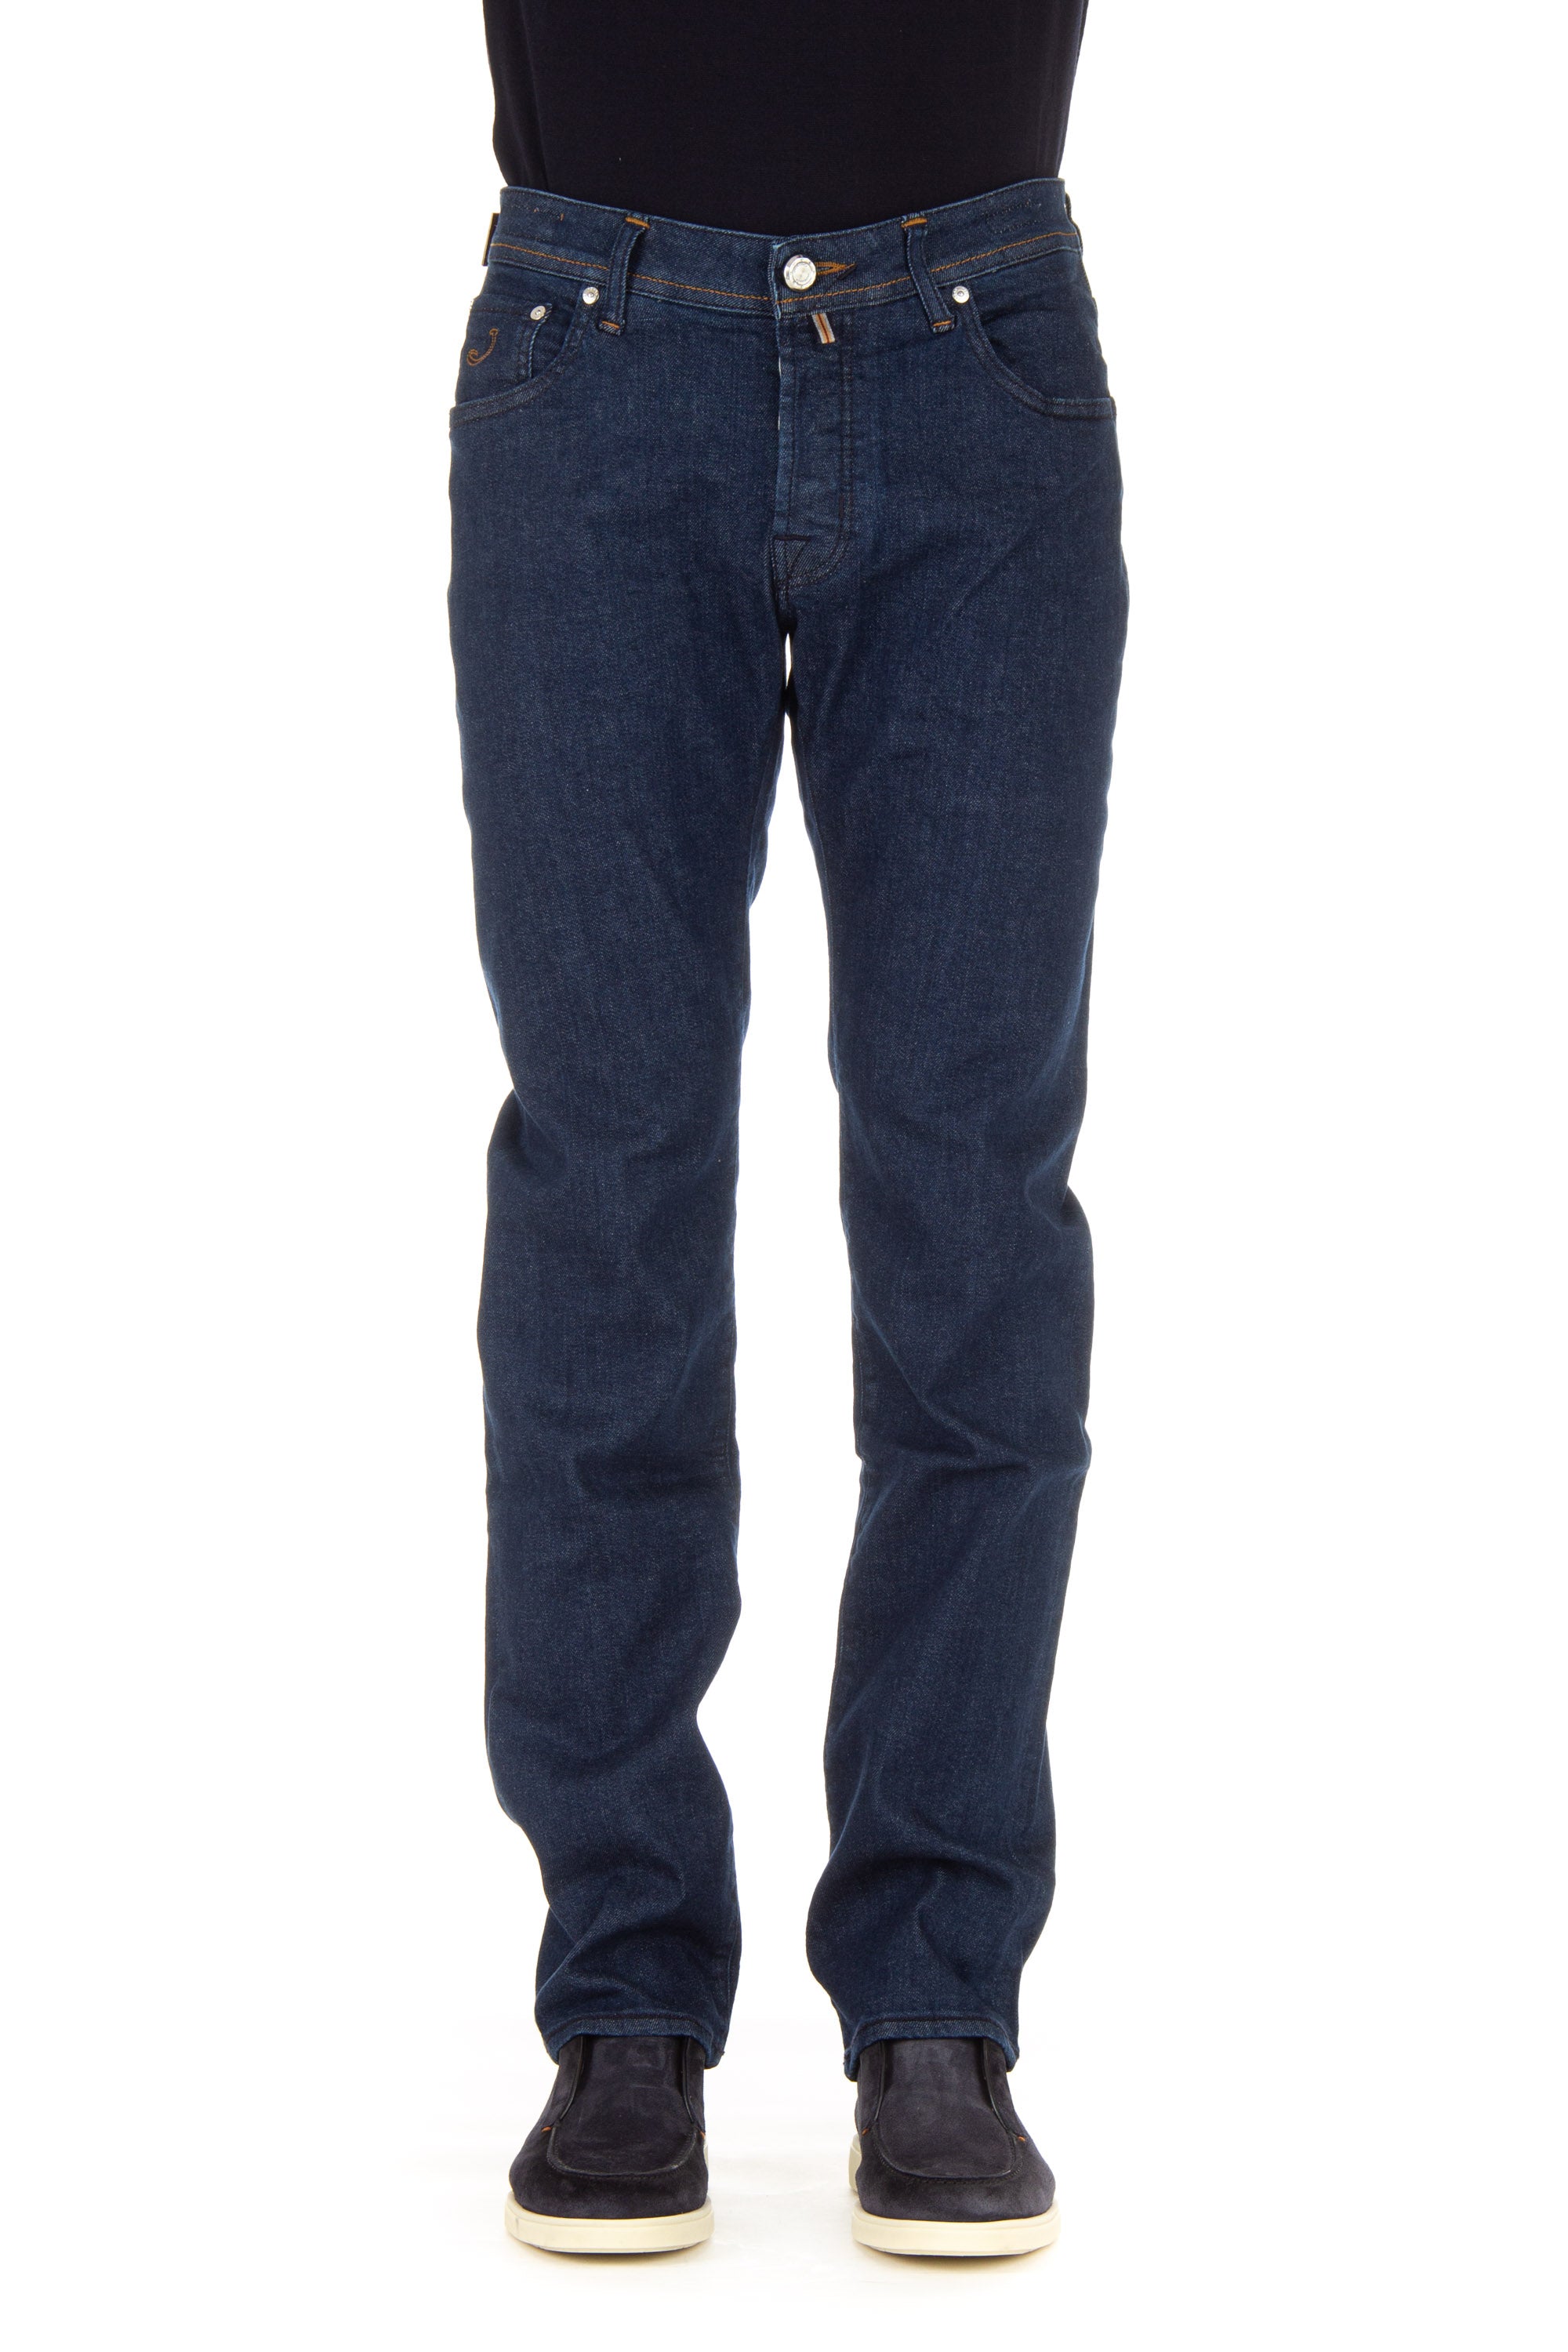 Limited edition blue label nick fit jeans